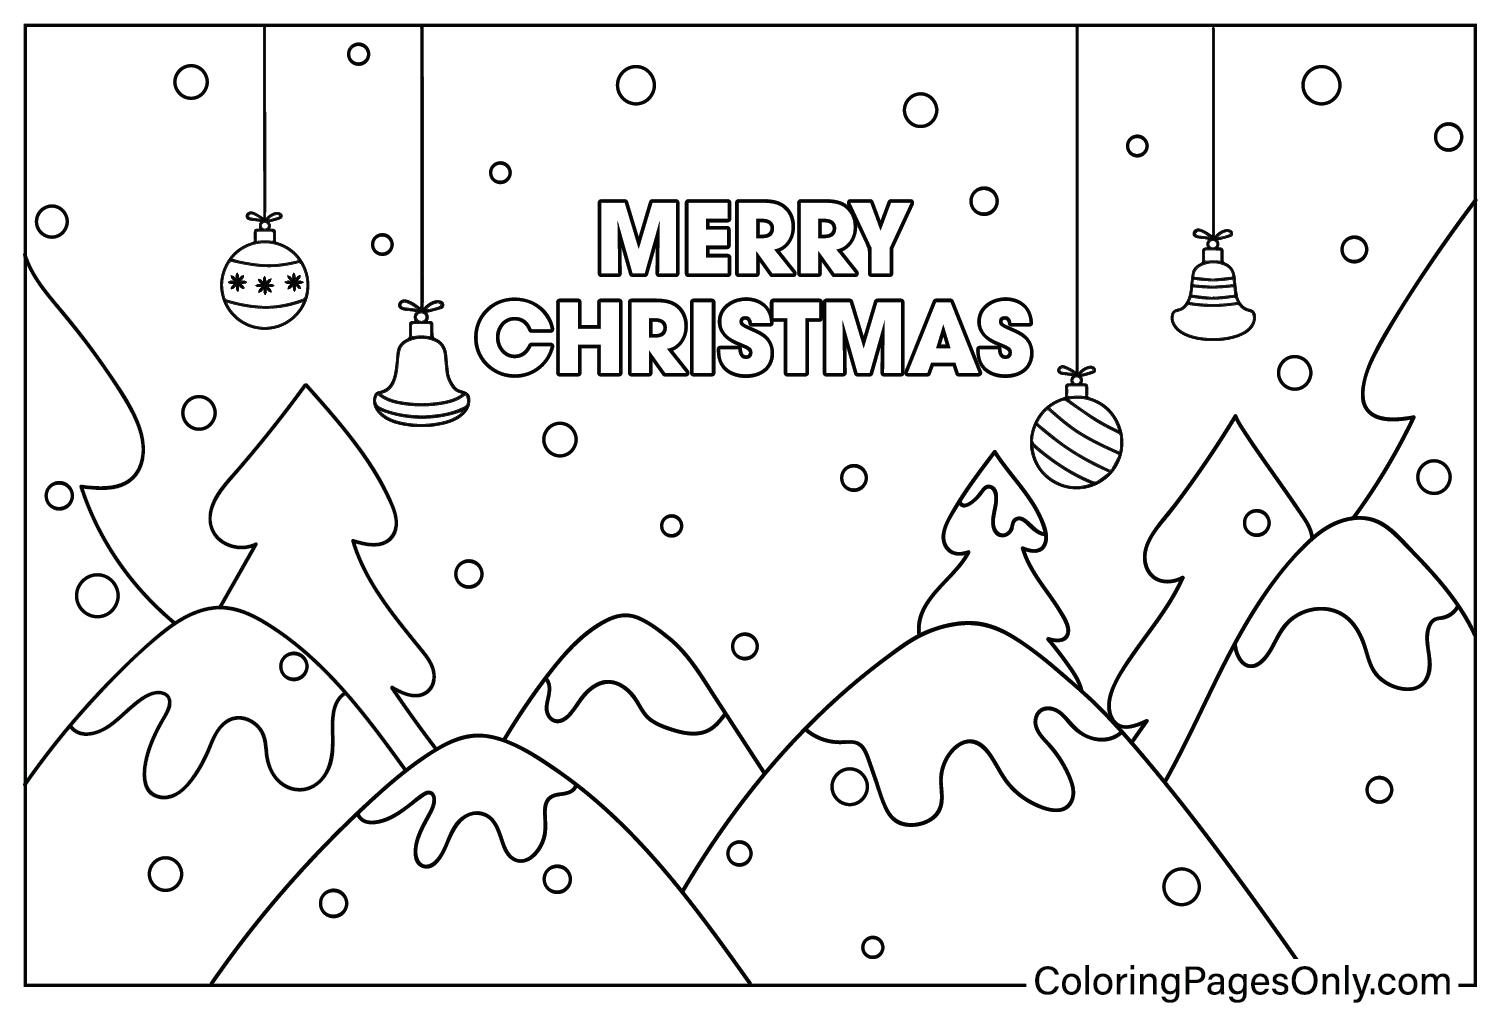 Christmas Wallpaper Coloring Pages to for Kids from Christmas Wallpaper